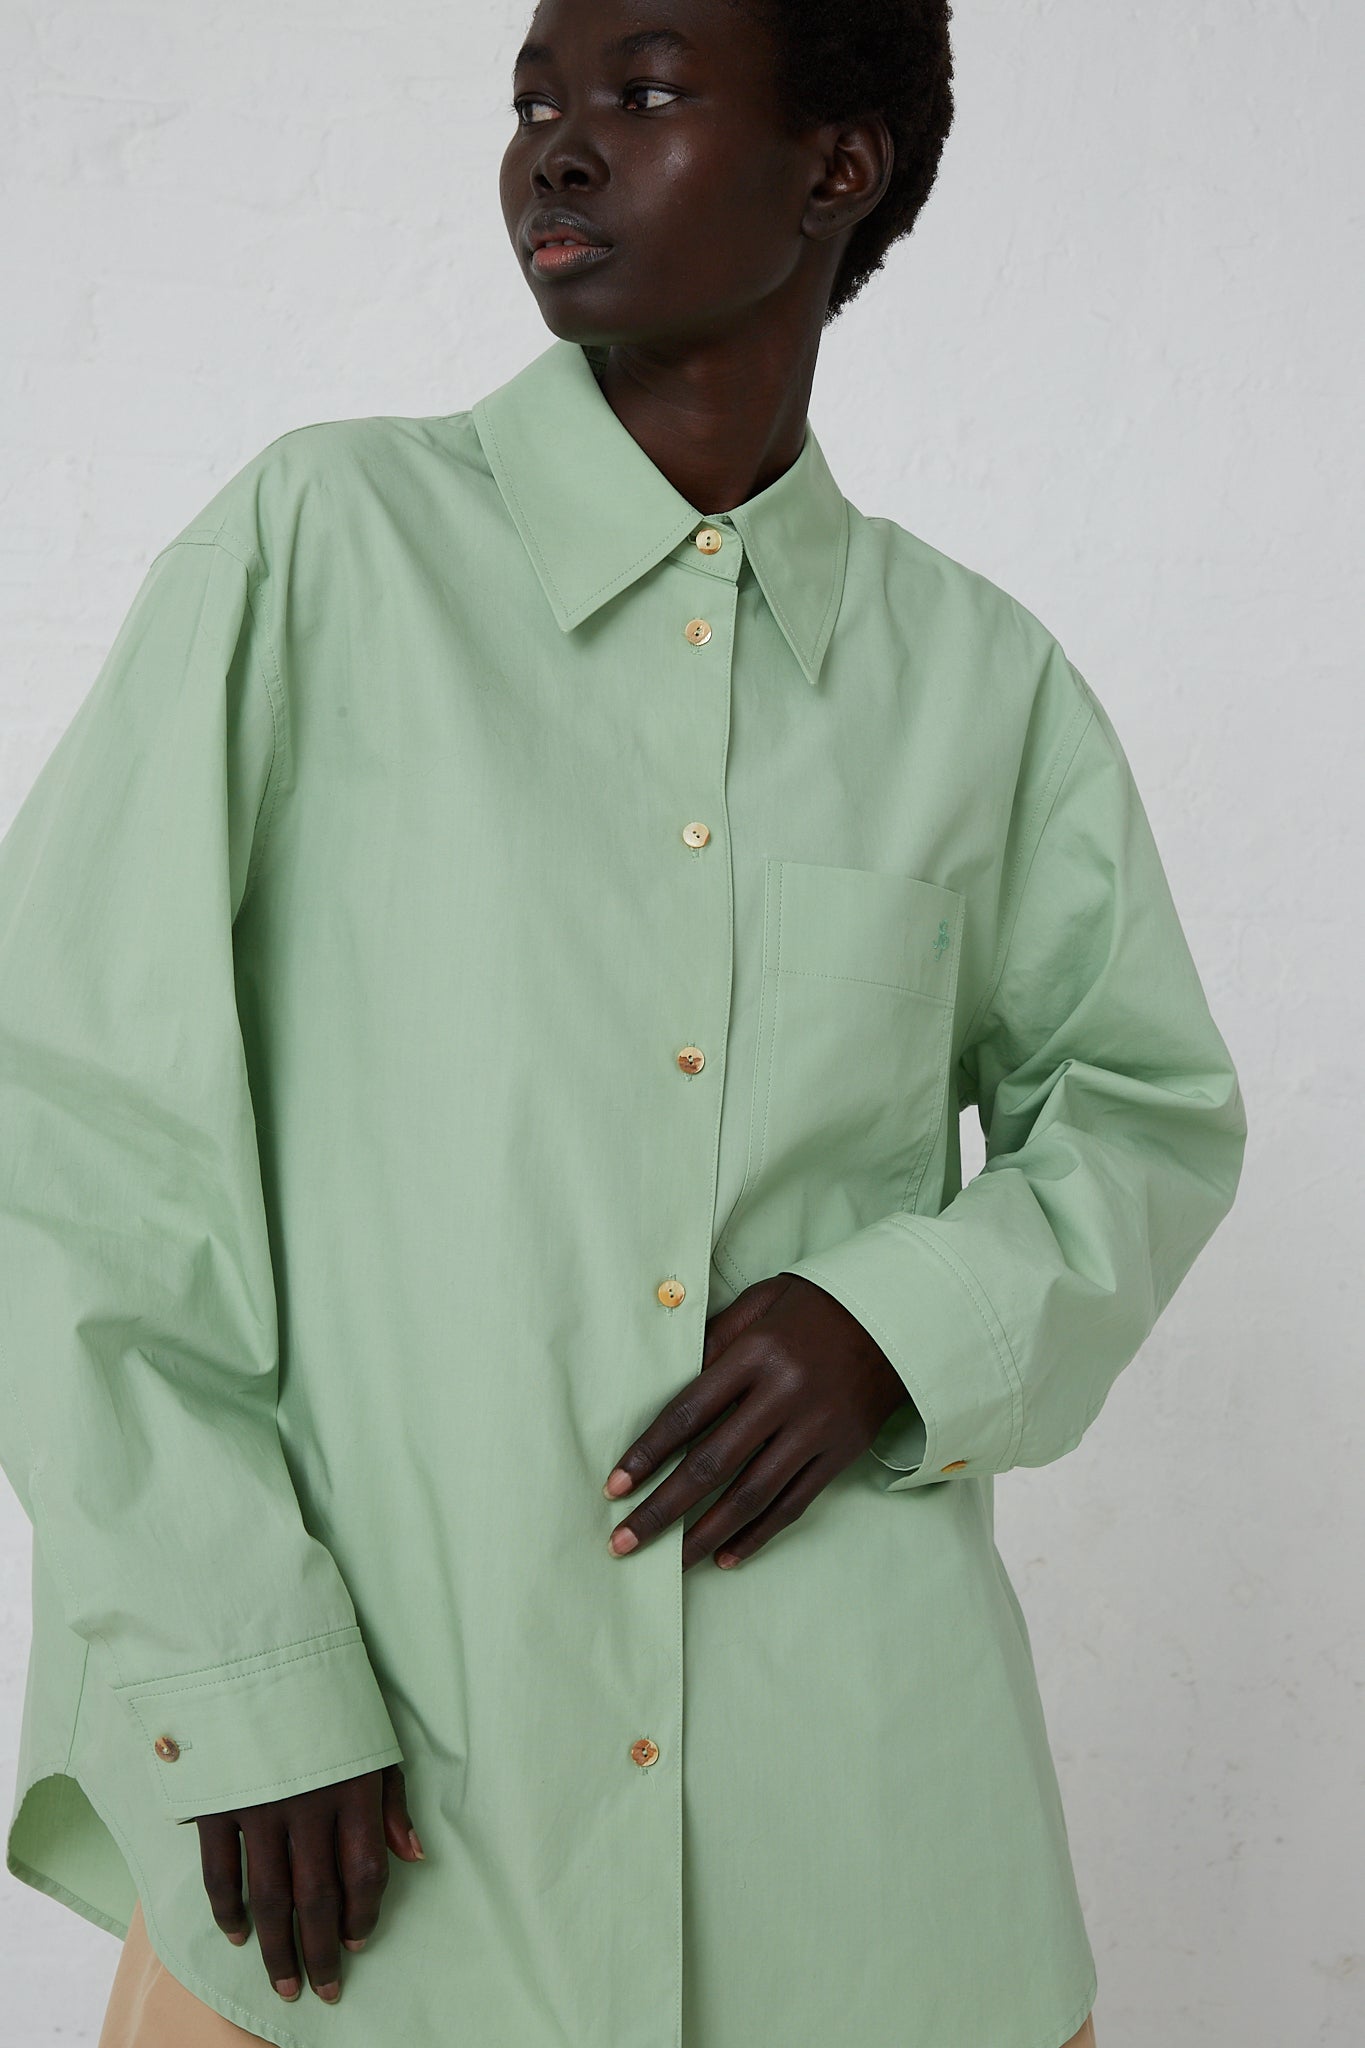 The model is wearing an Organic Cotton Caprice Shirt in Mint made by Rejina Pyo with front button closure, paired with tan pants.